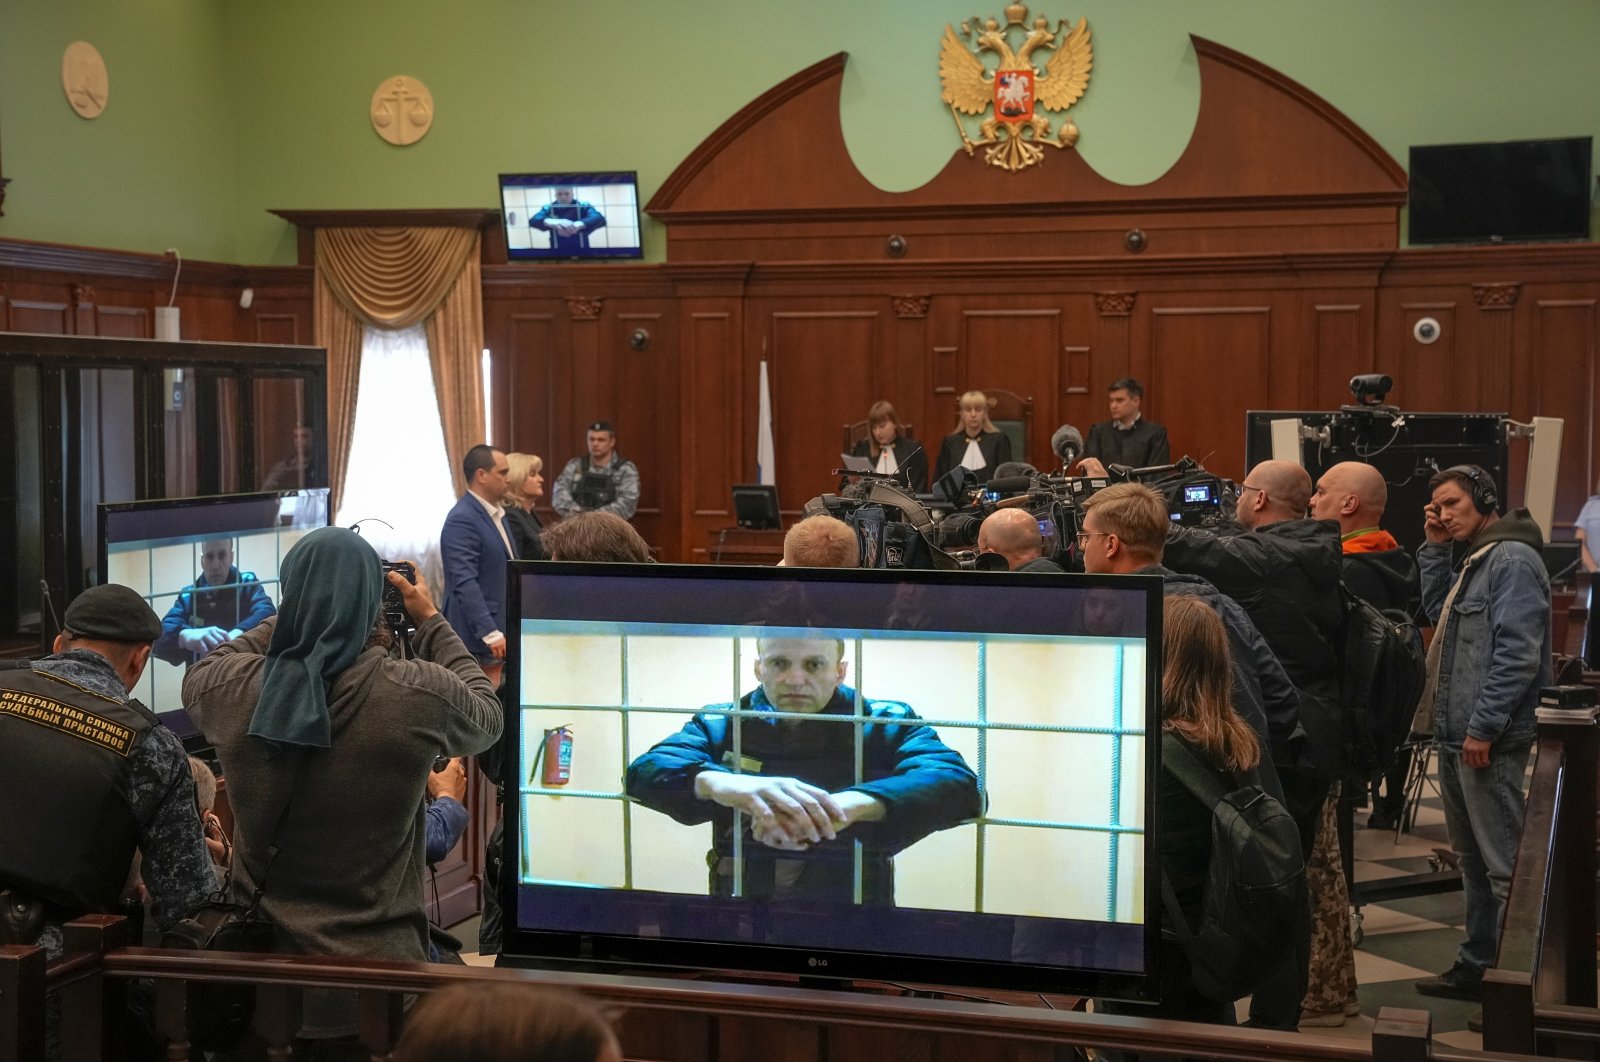 Russian opposition leader Alexei Navalny appears on a video link from prison, in a photo provided by the Russian Federal Penitentiary Service at Moscow City Court, Russia, May 24, 2022. (AP Photo)